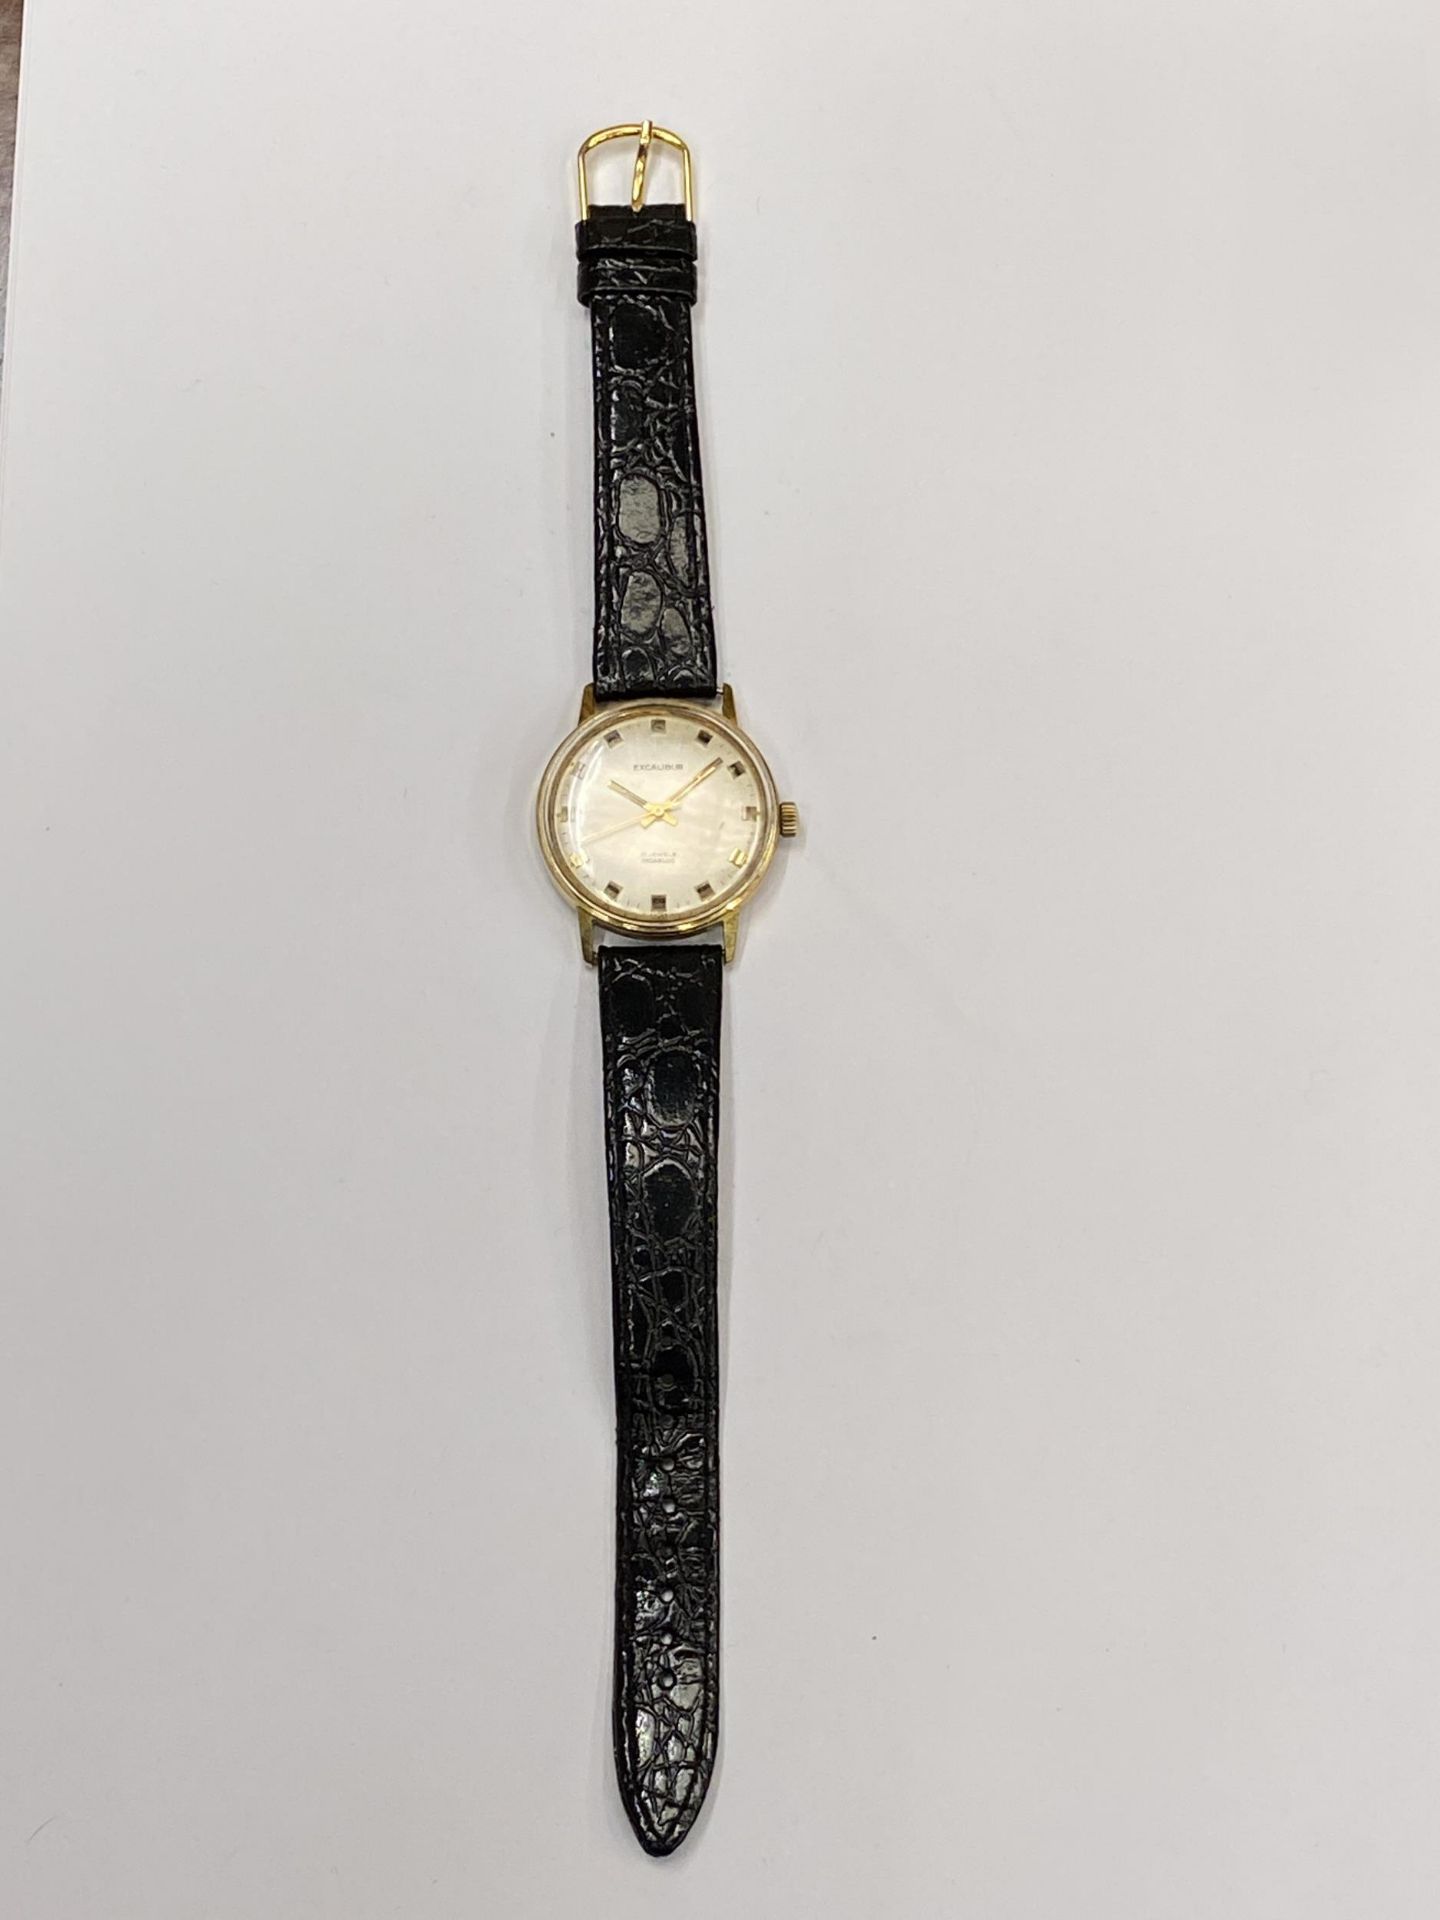 A GENTS VINTAGE EXCALIBUR WATCH, WORKING AT TIME OF CATALOGUING BUT NO WARRANTY GIVEN - Image 3 of 3